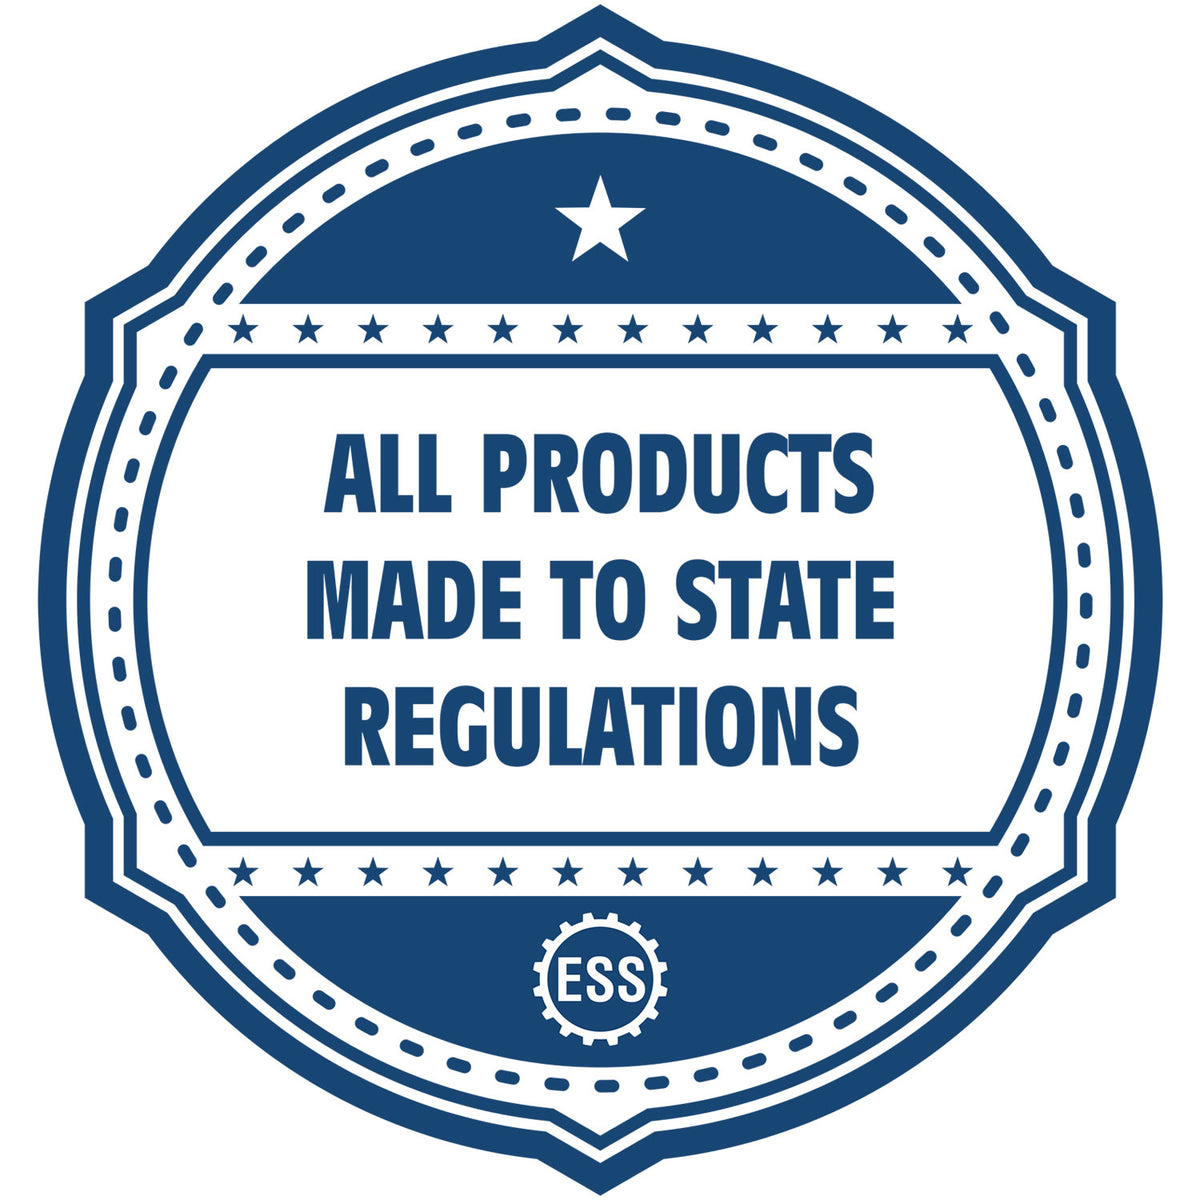 An icon or badge element for the Illinois Landscape Architectural Seal Stamp showing that this product is made in compliance with state regulations.